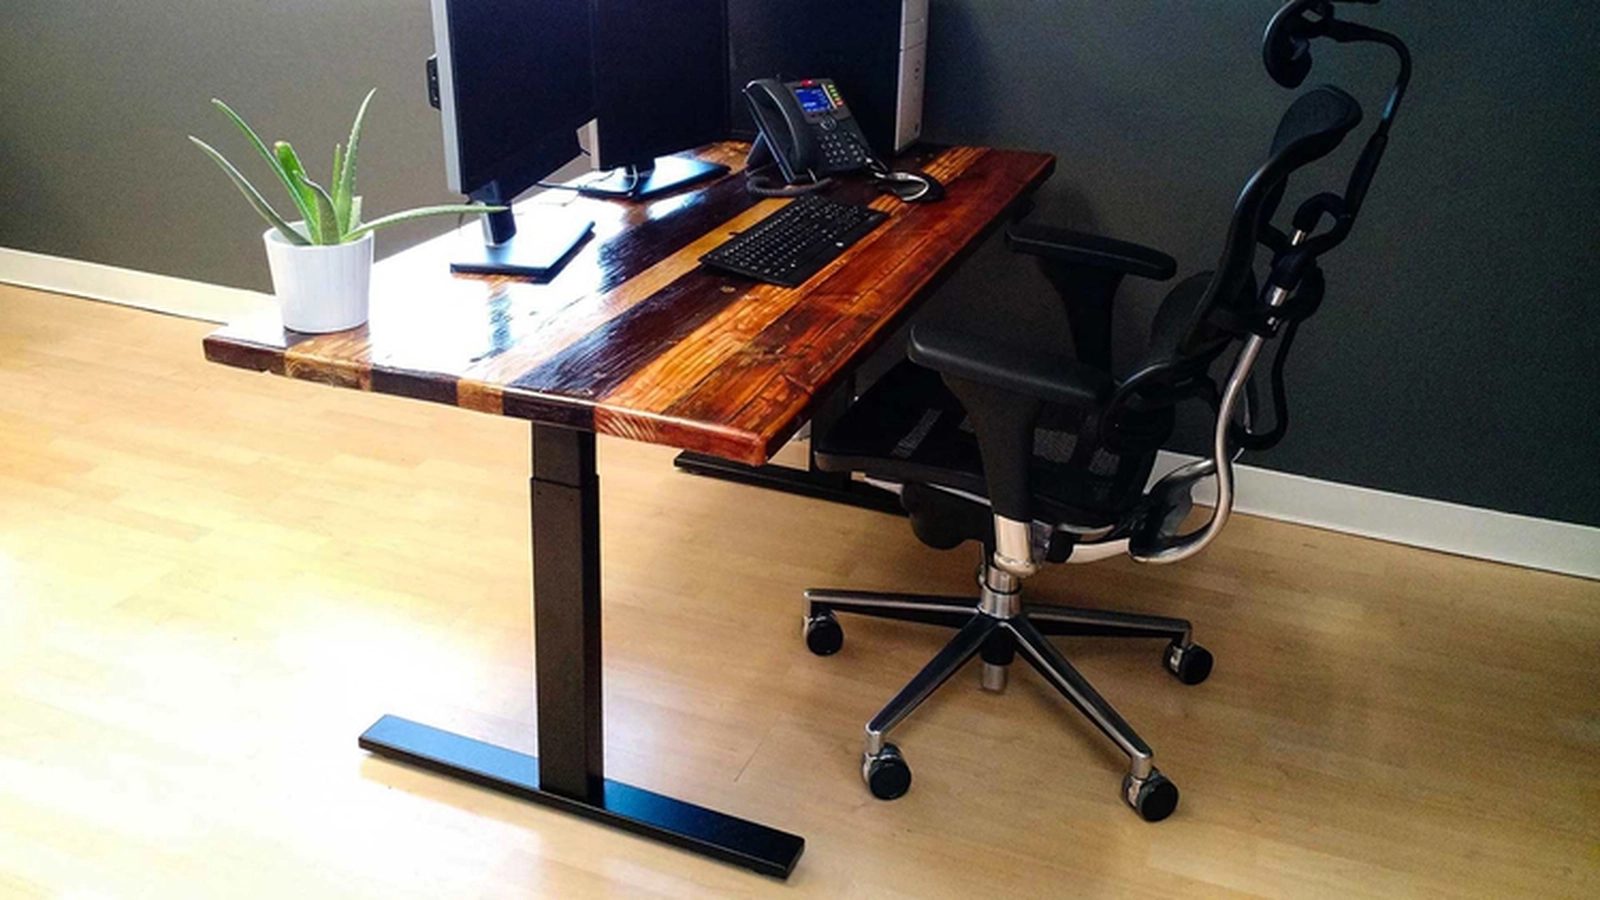 How To Choose The Best Frames To Build A DIY Standing Desk